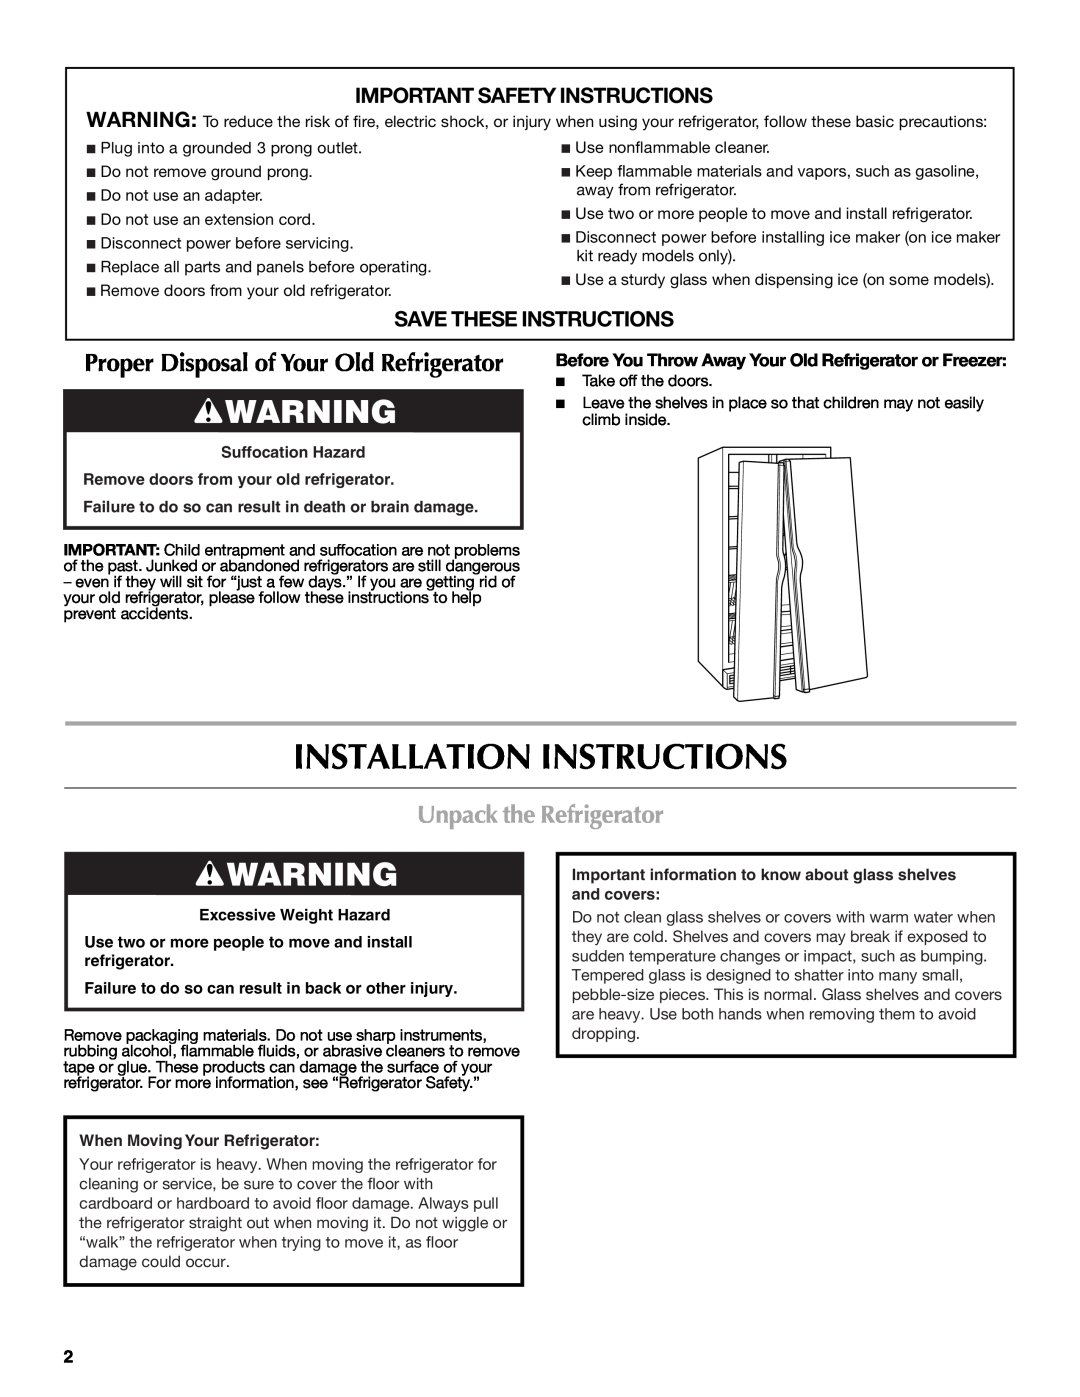 Maytag W10216897A Installation Instructions, Unpack the Refrigerator, Important Safety Instructions, Suffocation Hazard 